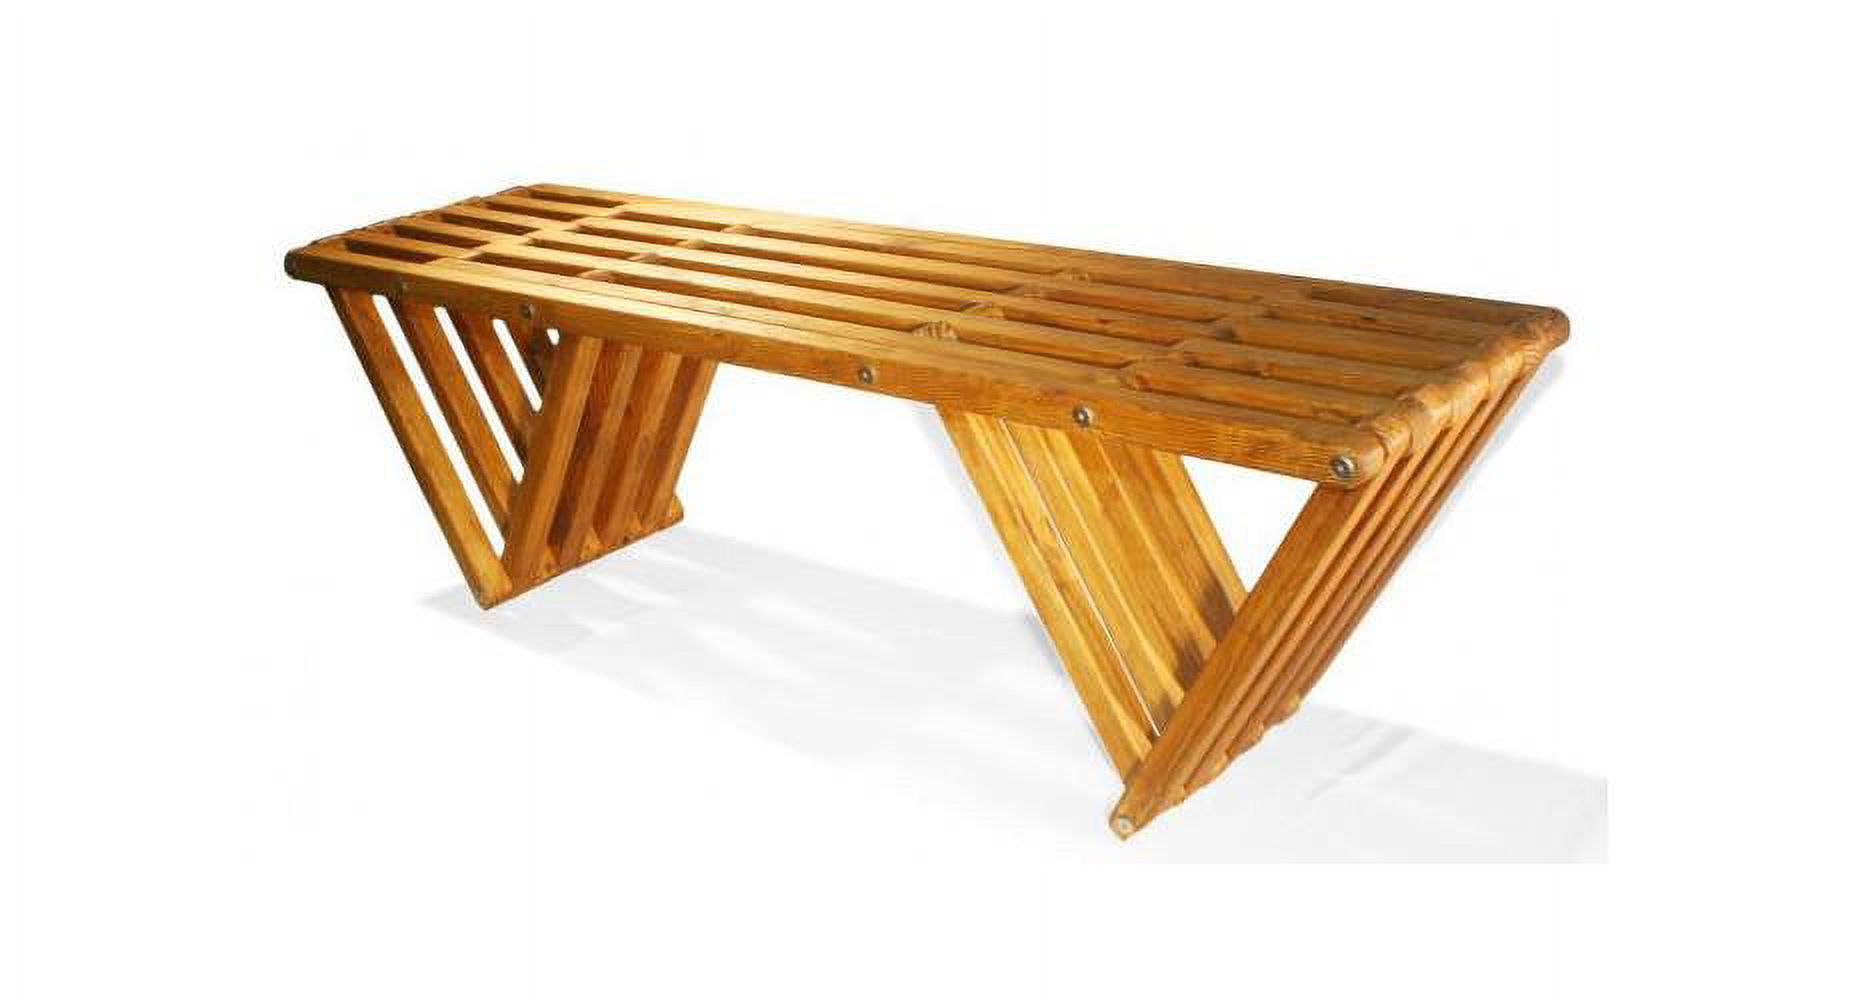 Eco-friendly Bench in Light Brown Finish - image 1 of 4